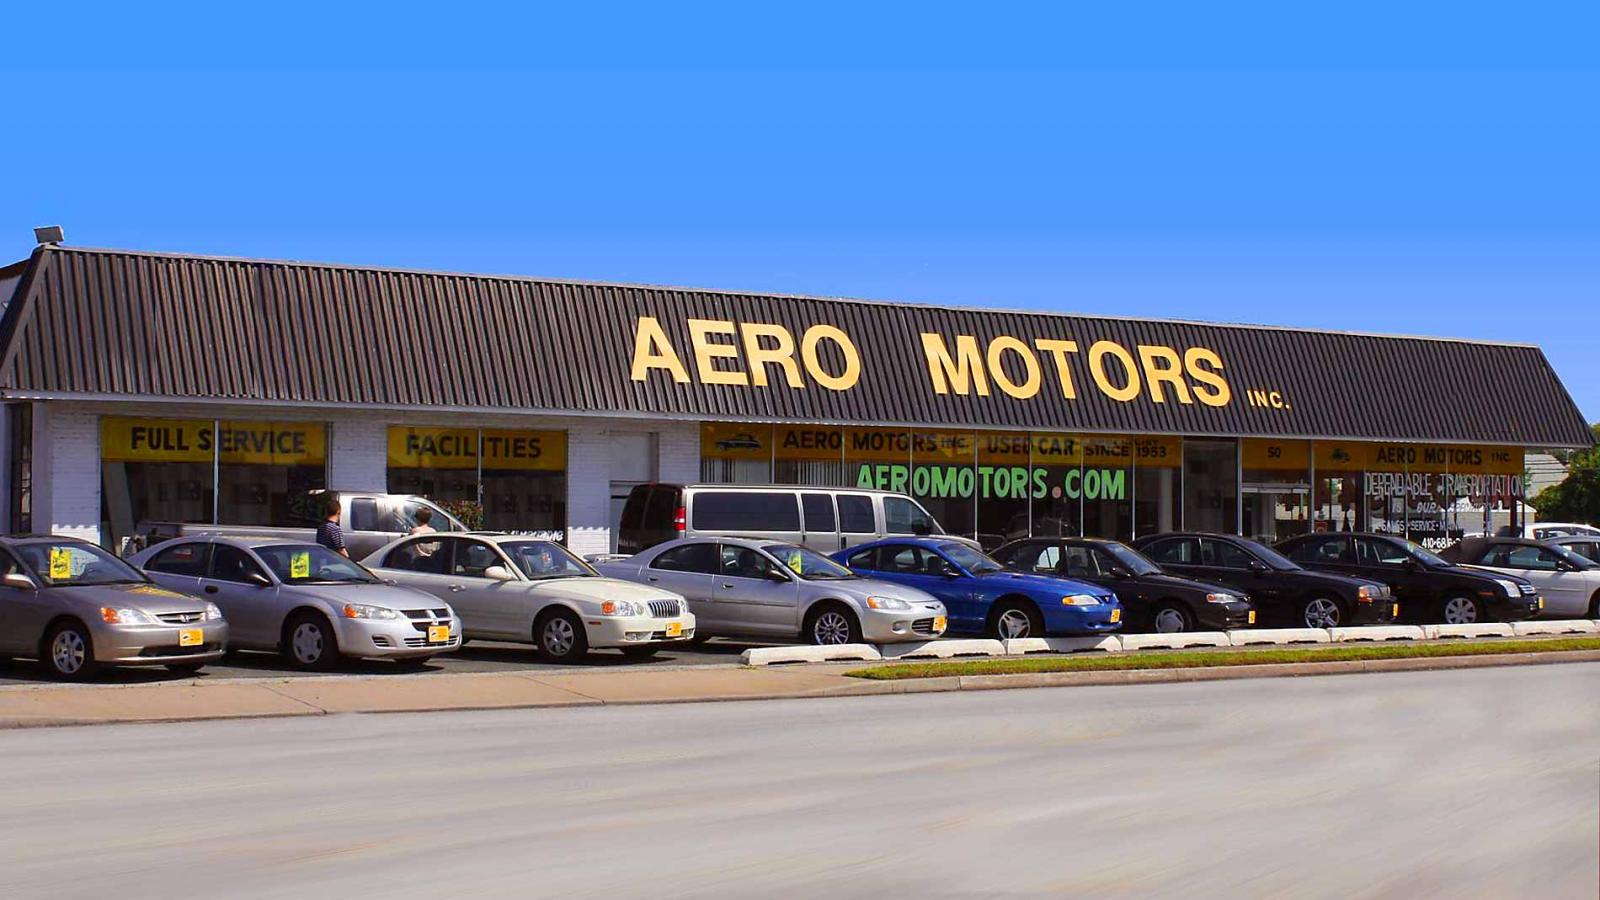 Aero Motors Used Cars For Sale Essex Md Used Bhph Cars Essex Md Bad Credit Car Loans Baltimore Md Pre-owned Auto Sales Rosedale Md In House Car Financing Dundalk Md Special